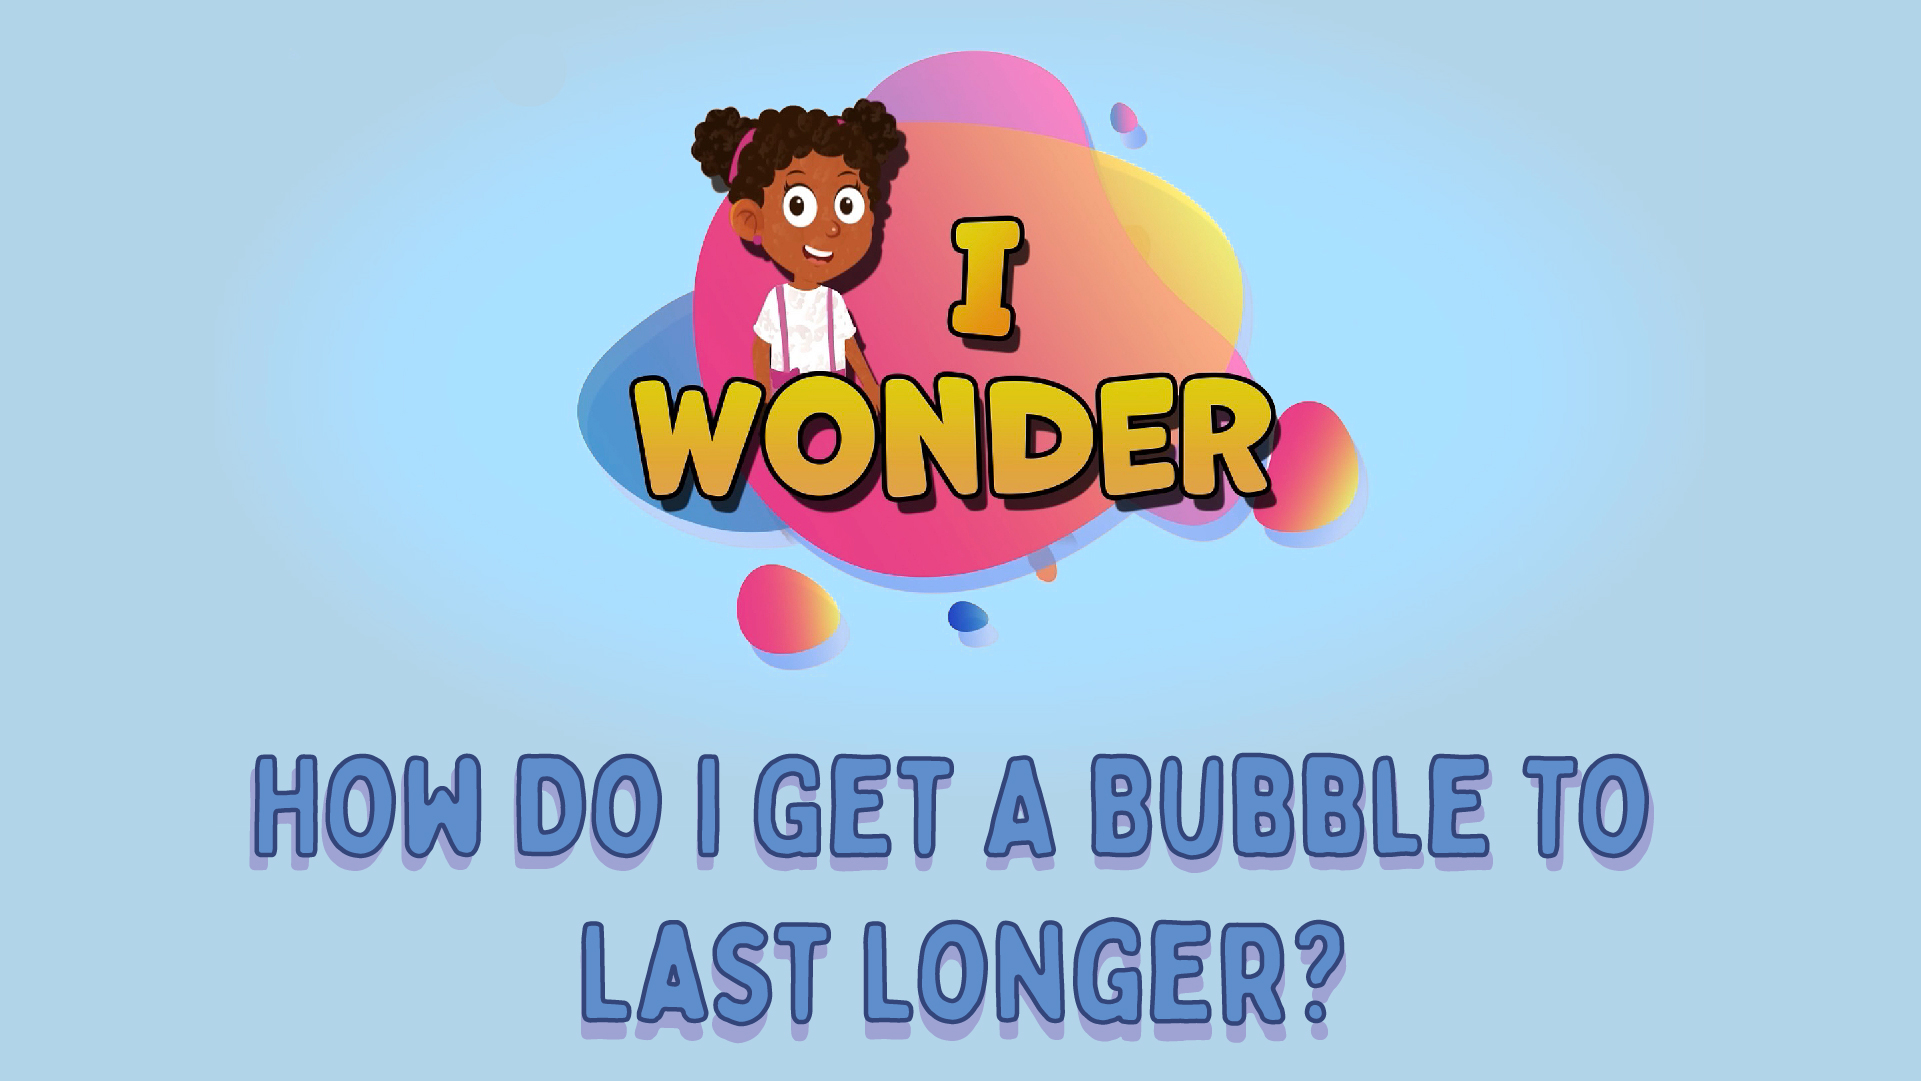 How Do I Get A Bubble To Last Longer?